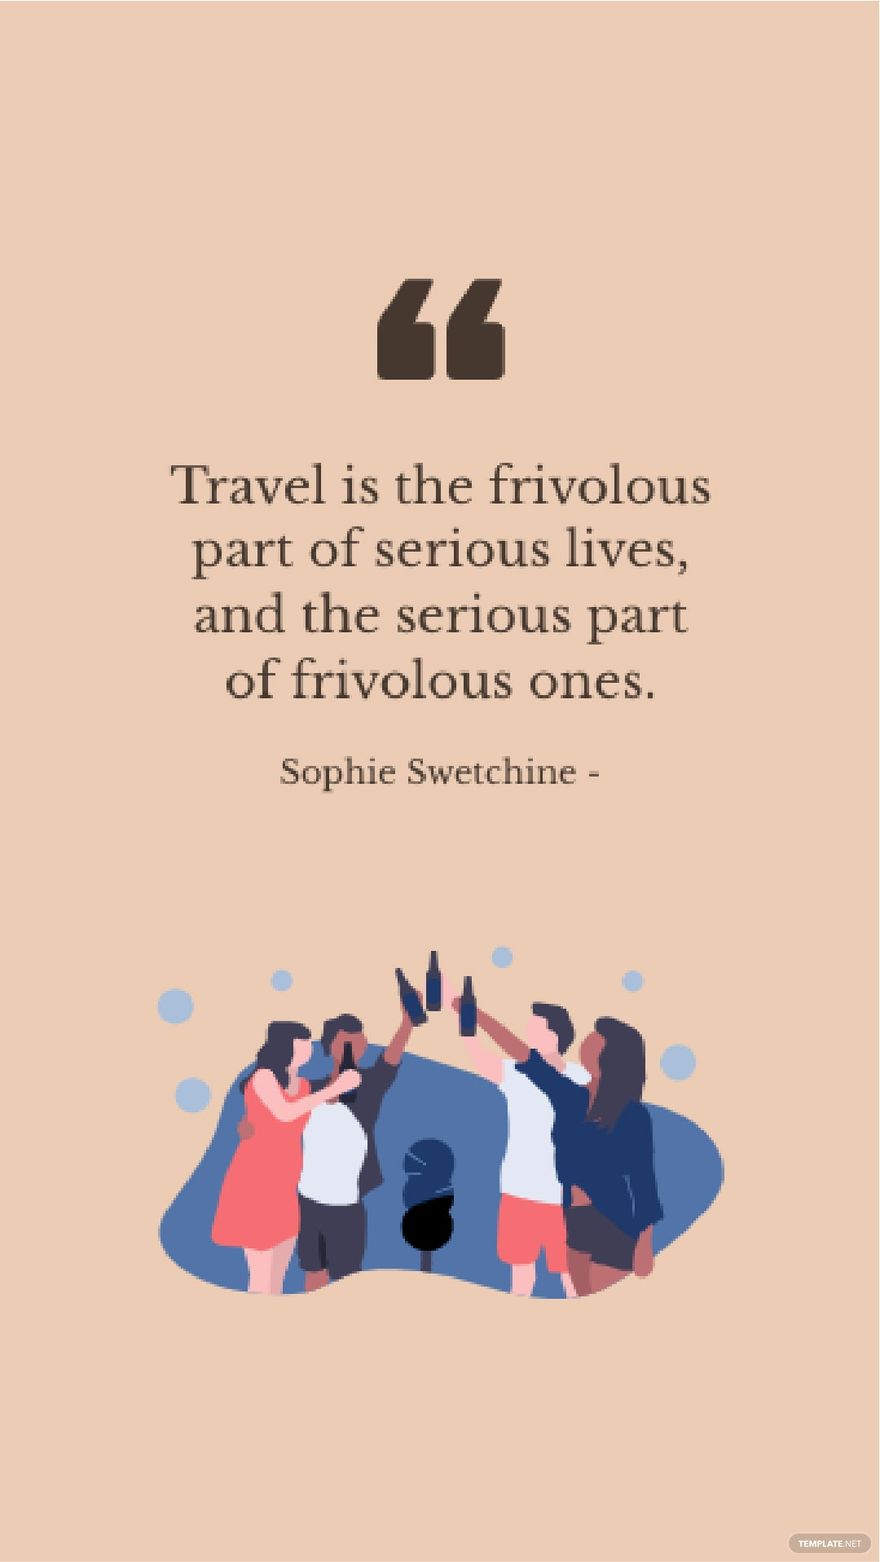 Free Sophie Swetchine - Travel is the frivolous part of serious lives, and the serious part of frivolous ones.